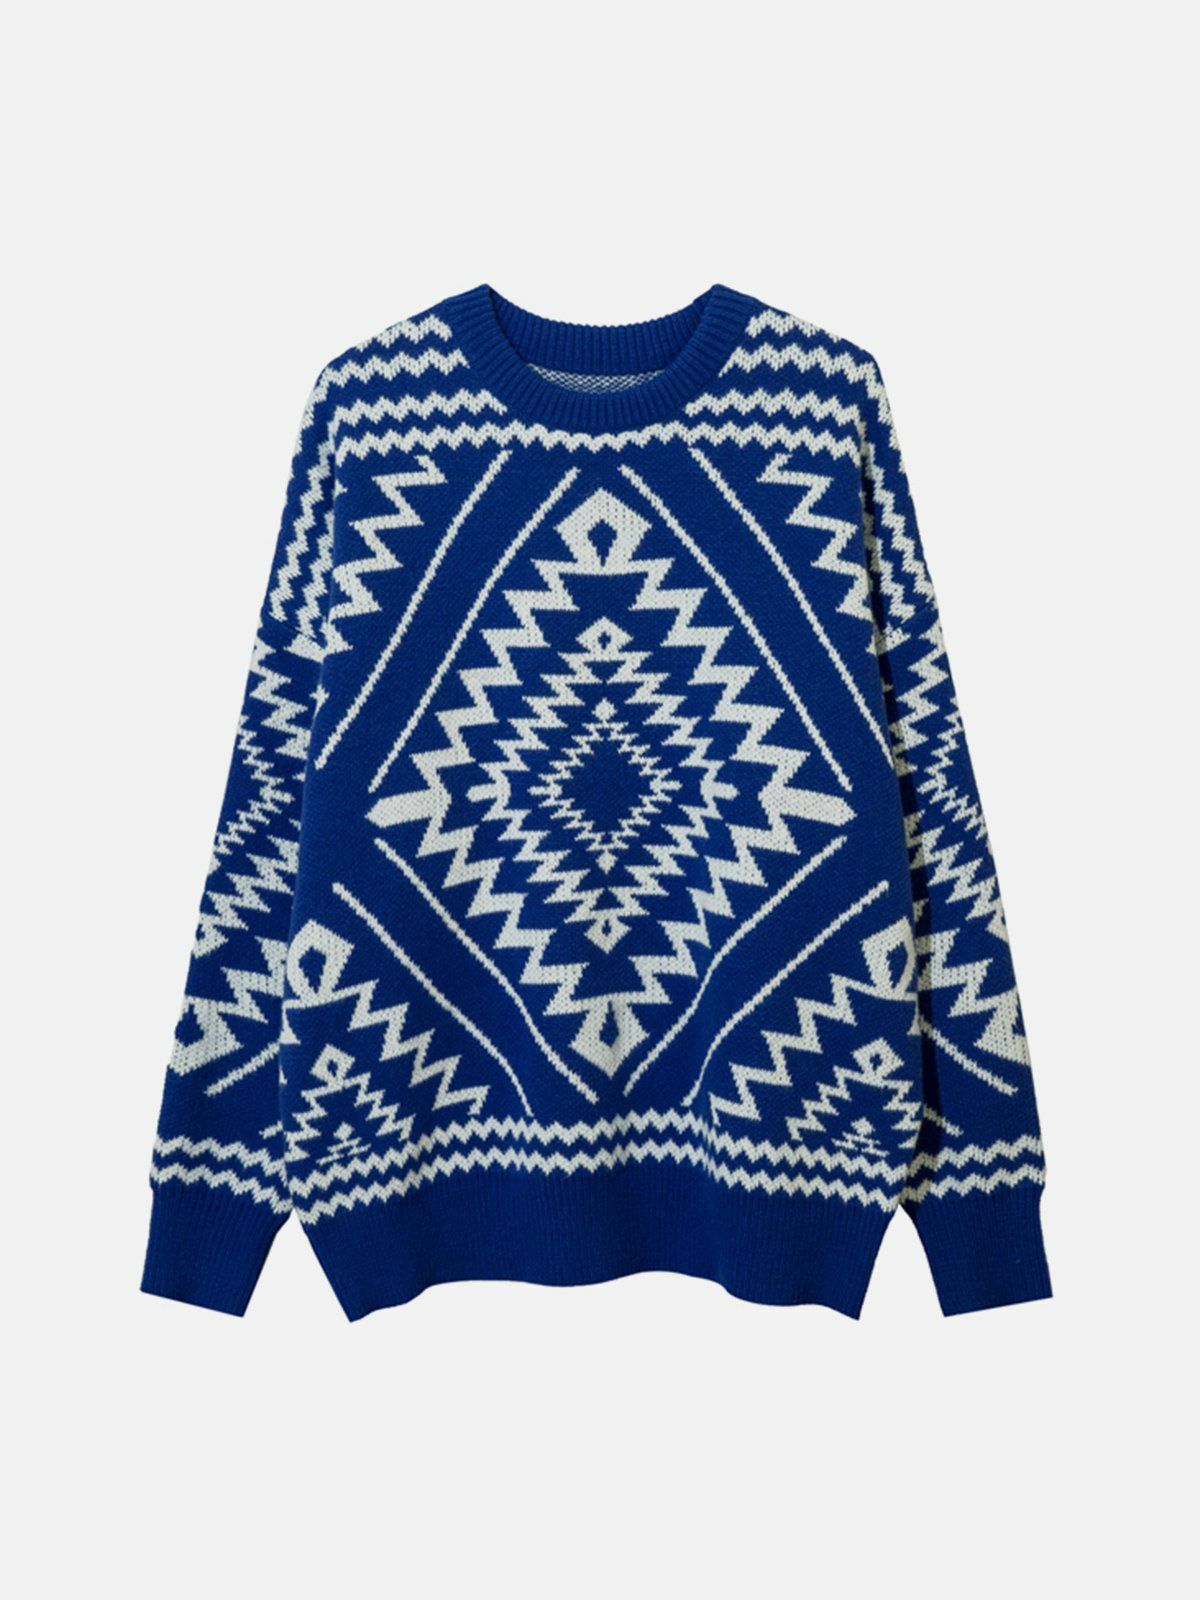 totem print graphic sweater edgy y2k streetwear 7742